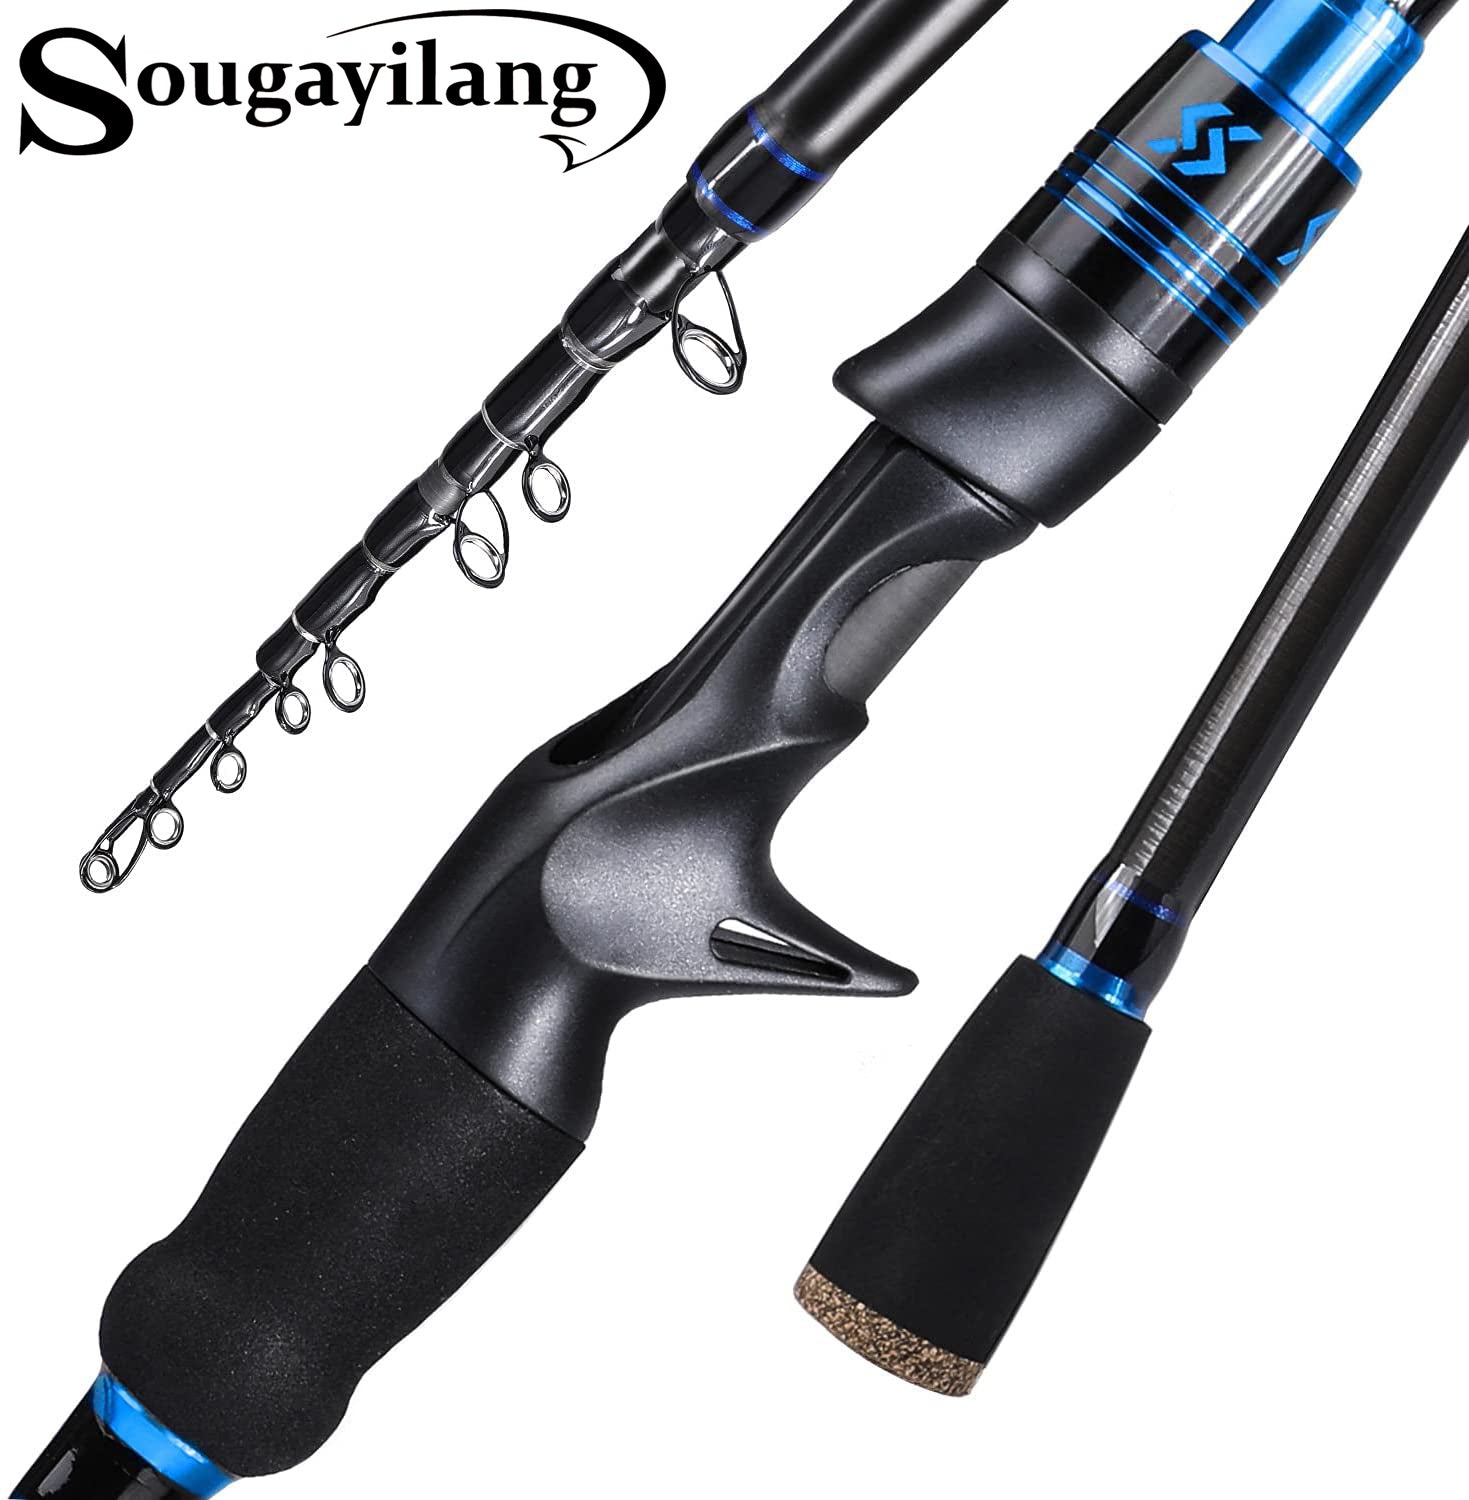 Telescopic Fishing Rod, Lightweight Carbon Fiber - Collapsible Freshwater and Saltwater Fishing Pole for Travel - Durable, Premium Quality Rods, Poles